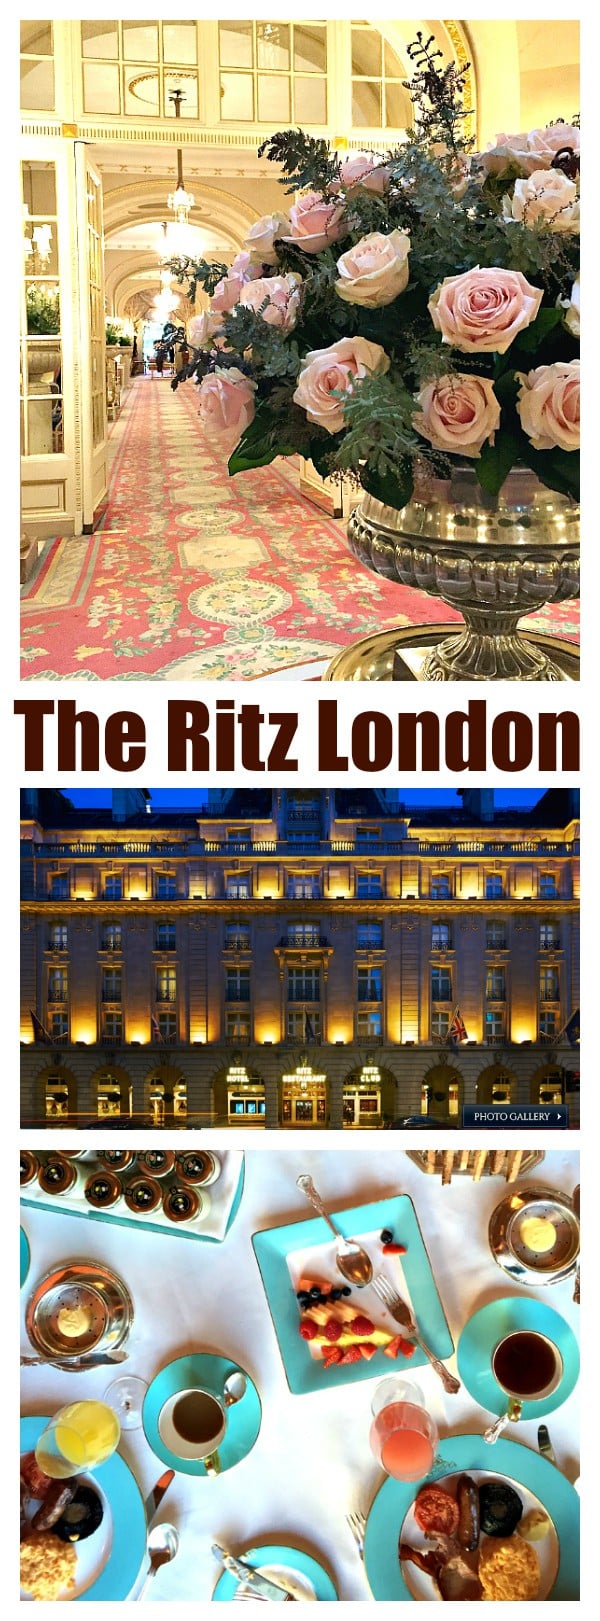 This is a review is of one of London's grandest hotels, world-famous The Ritz London hotel.